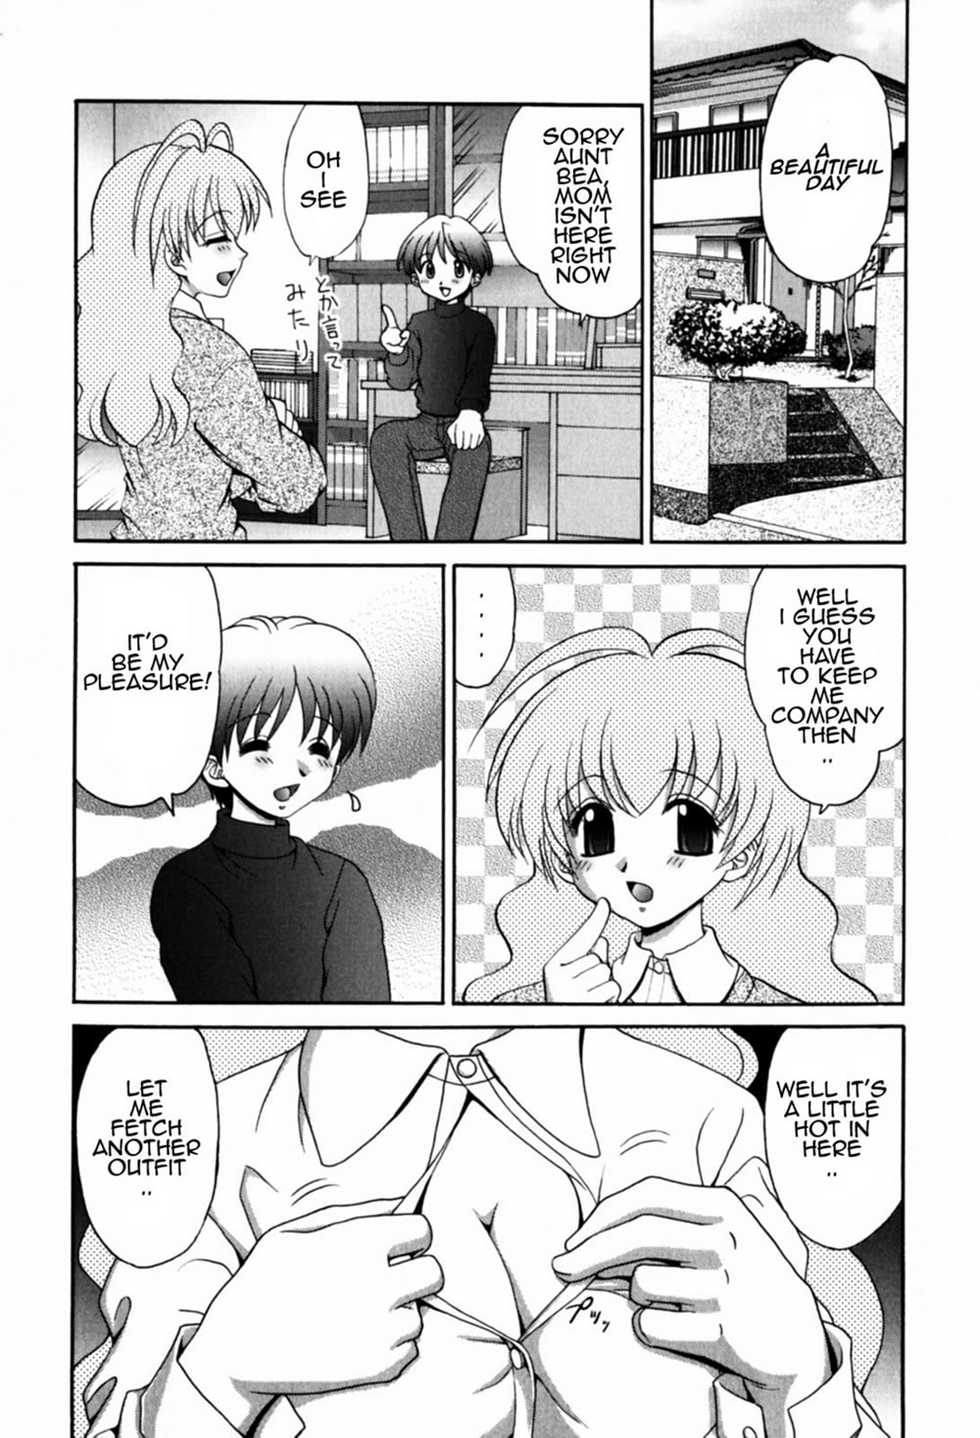 Aunt Relations [English] [Rewrite] [AnonX] - Page 1